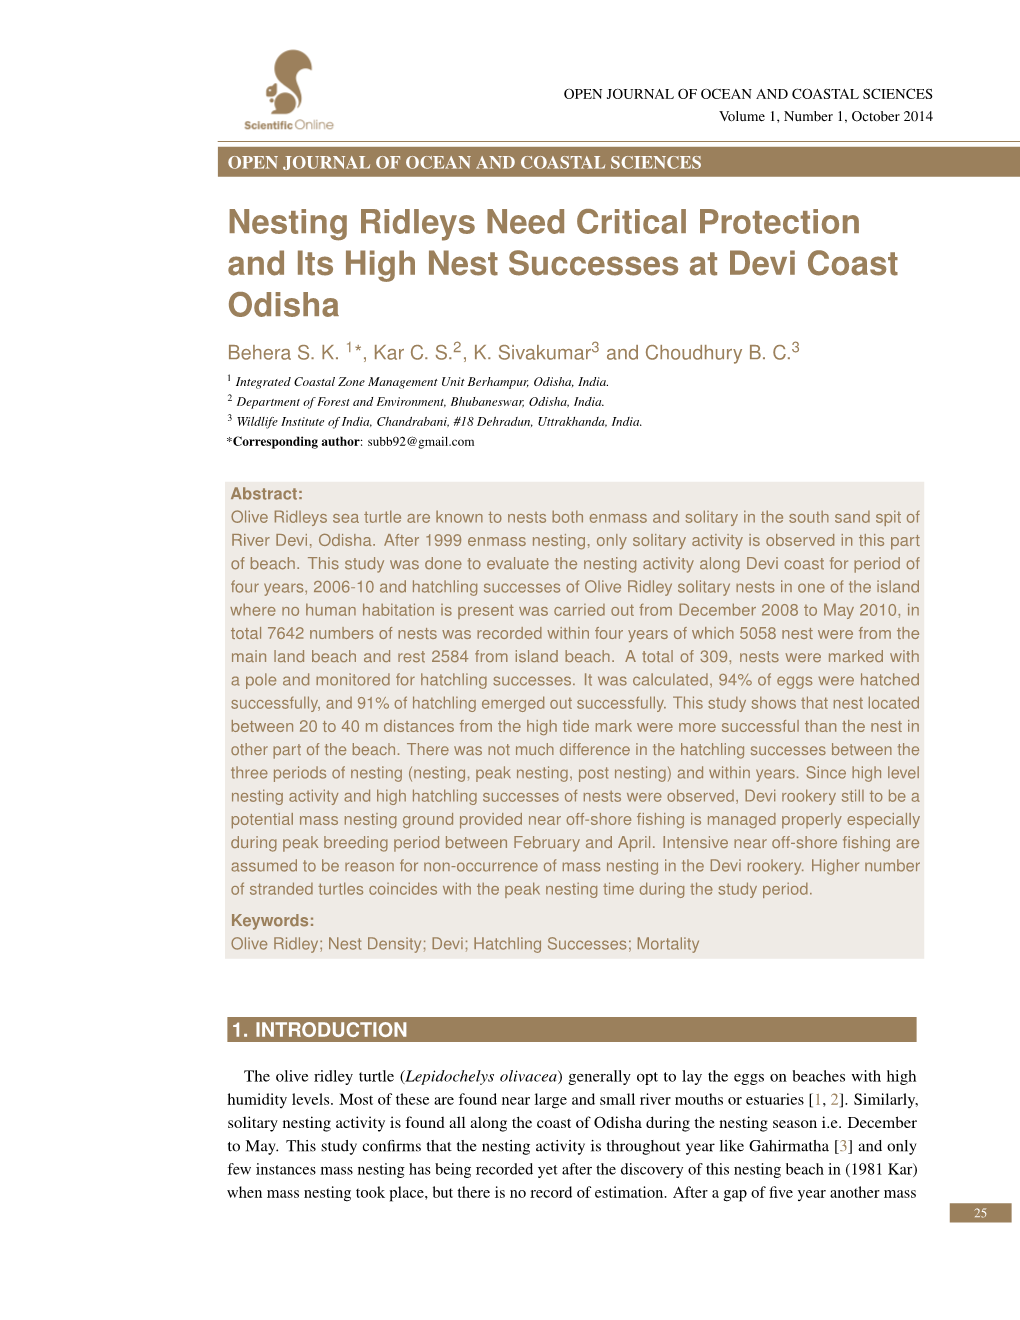 Nesting Ridleys Need Critical Protection and Its High Nest Successes at Devi Coast Odisha